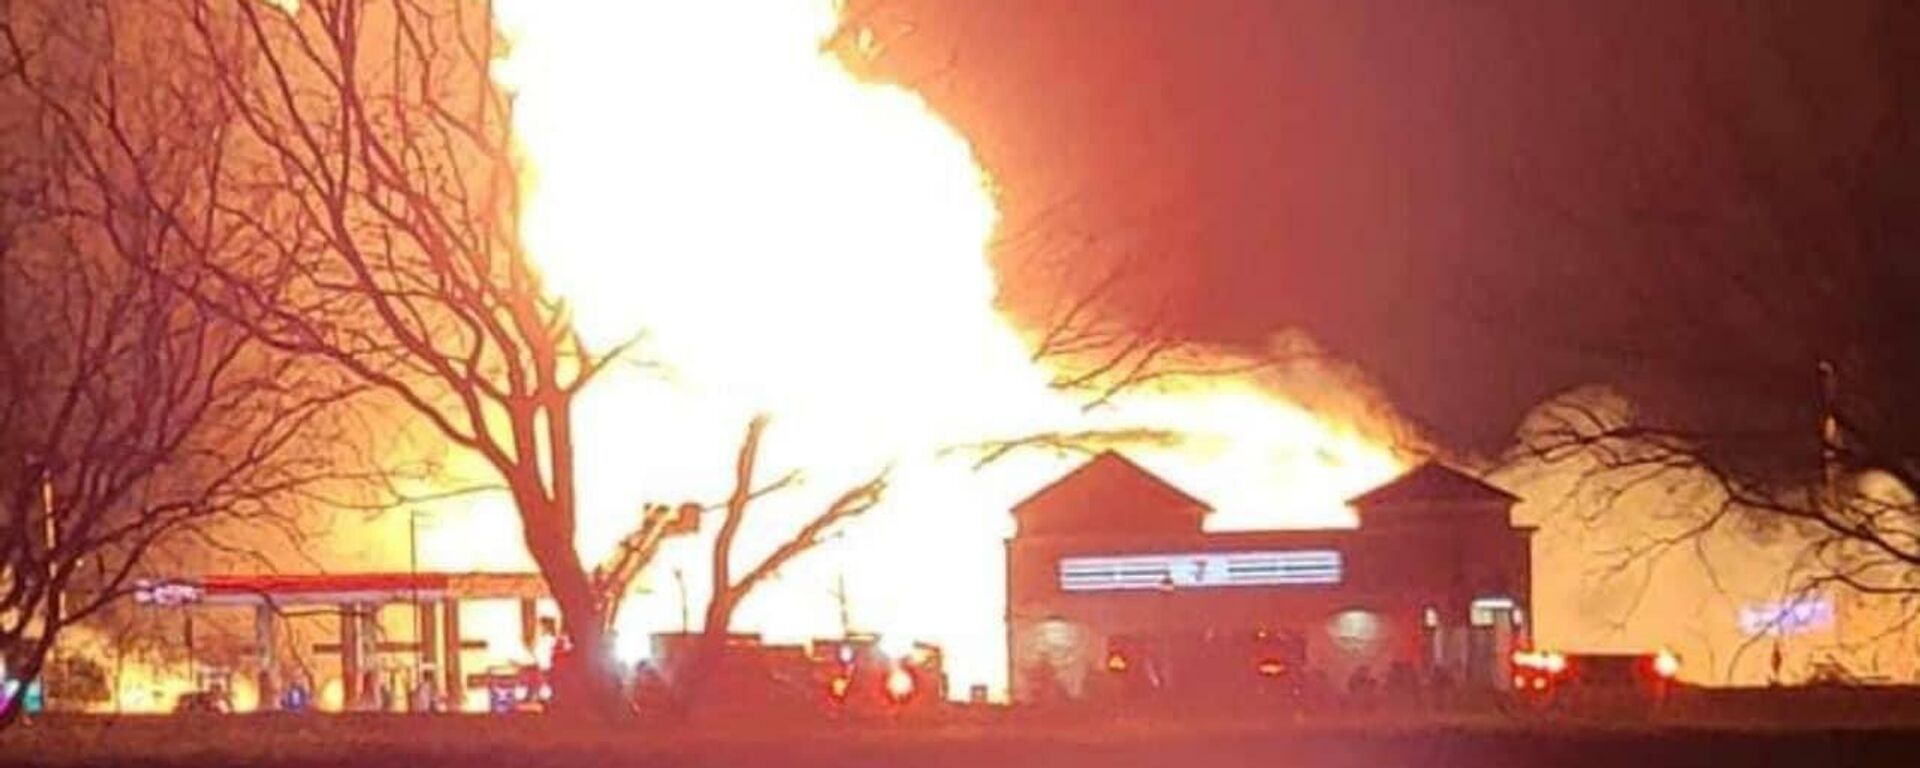 Tweet via Mansfield Fire Dept (@MansfieldFireTX): ****Major Incident****
At around 1:00 am on March 23, a vehicle ran into natural gas pipeline. There is a major fire. Hwy 287 is shutdown in all directions. Residents within a one mile radius are being evacuated. Shelter is available at 1261 S. Main St, Annette Perry Elementary - Sputnik International, 1920, 23.06.2022